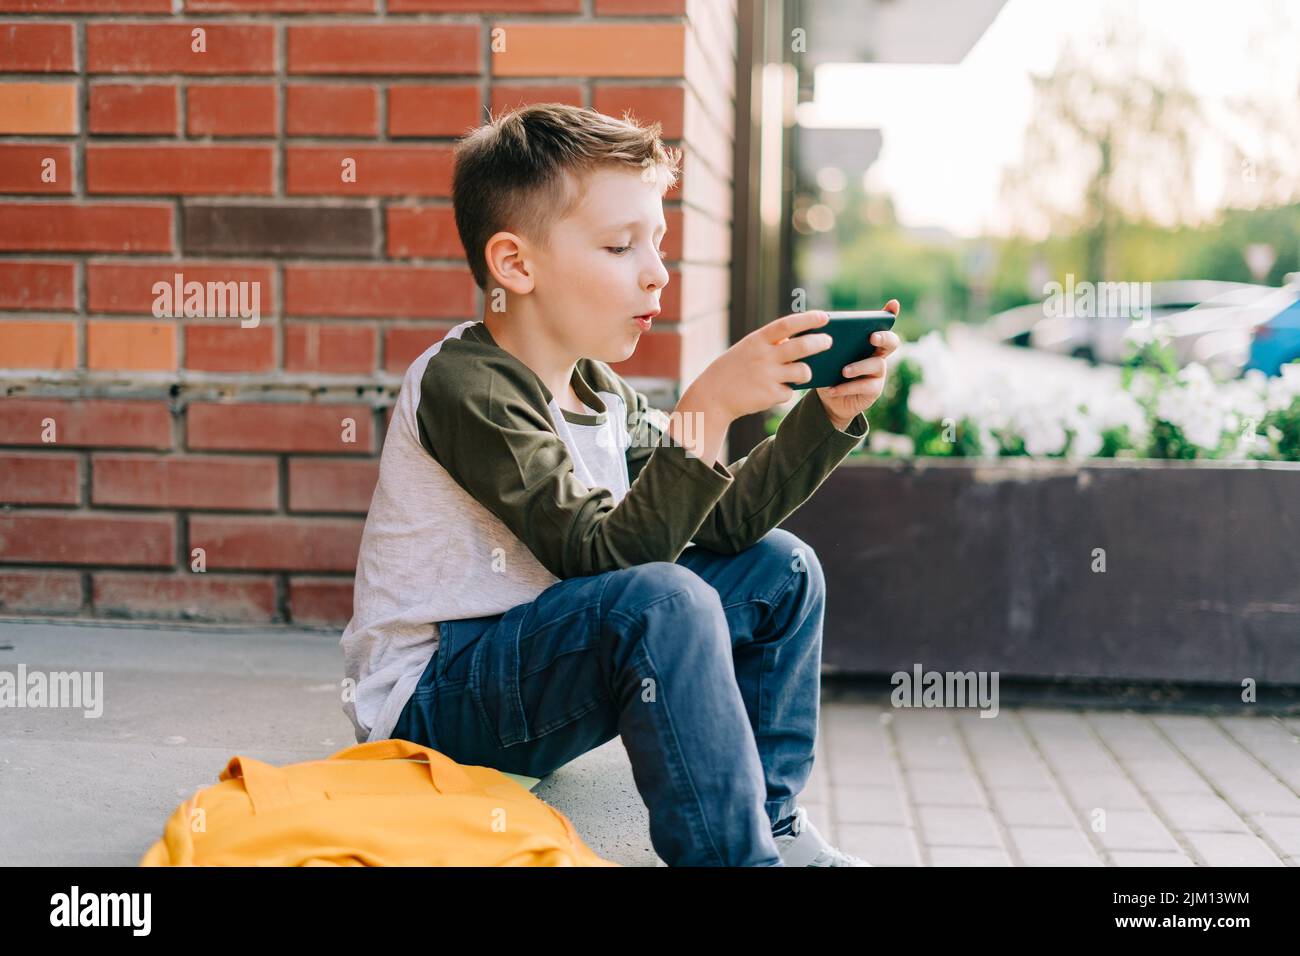 Back to school. Cute child with backpack, holding mobile phone, playing with cellphone. School boy pupil with bag. Elementary school student after Stock Photo